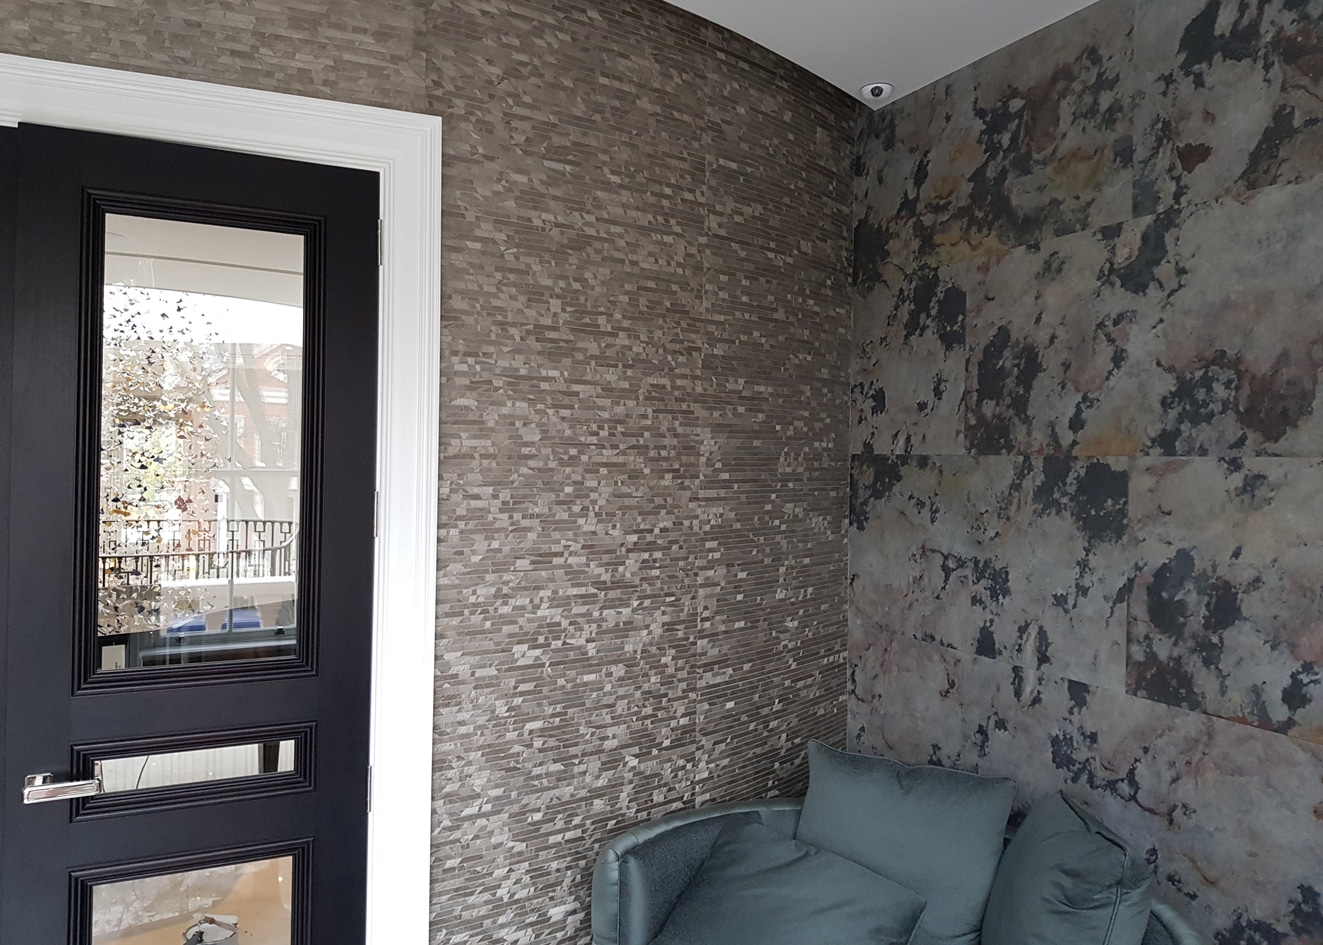 Silver Altfield London wallcovering on the left side and Phillip Jeffries Slate Tiles on the right.